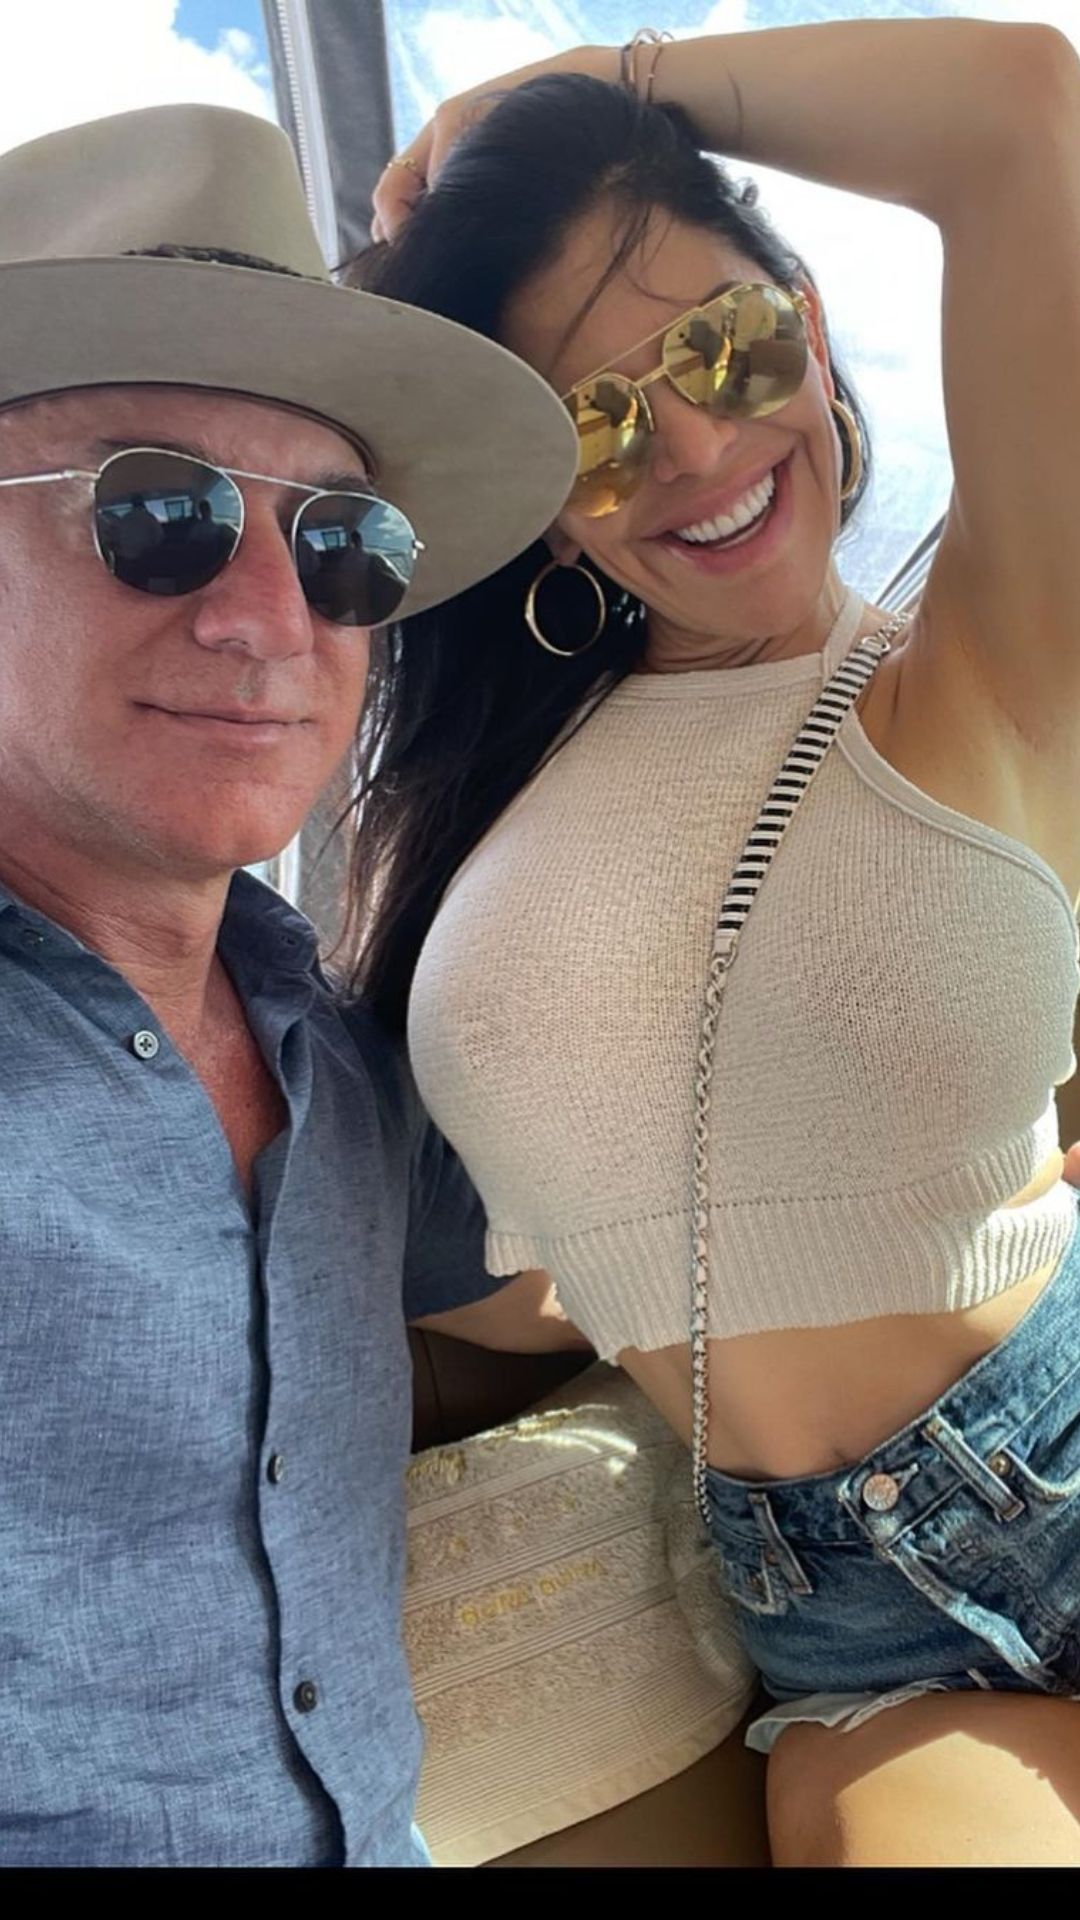 !0 things to know about Jeff Bezos and his new wife Lauren Sanchez